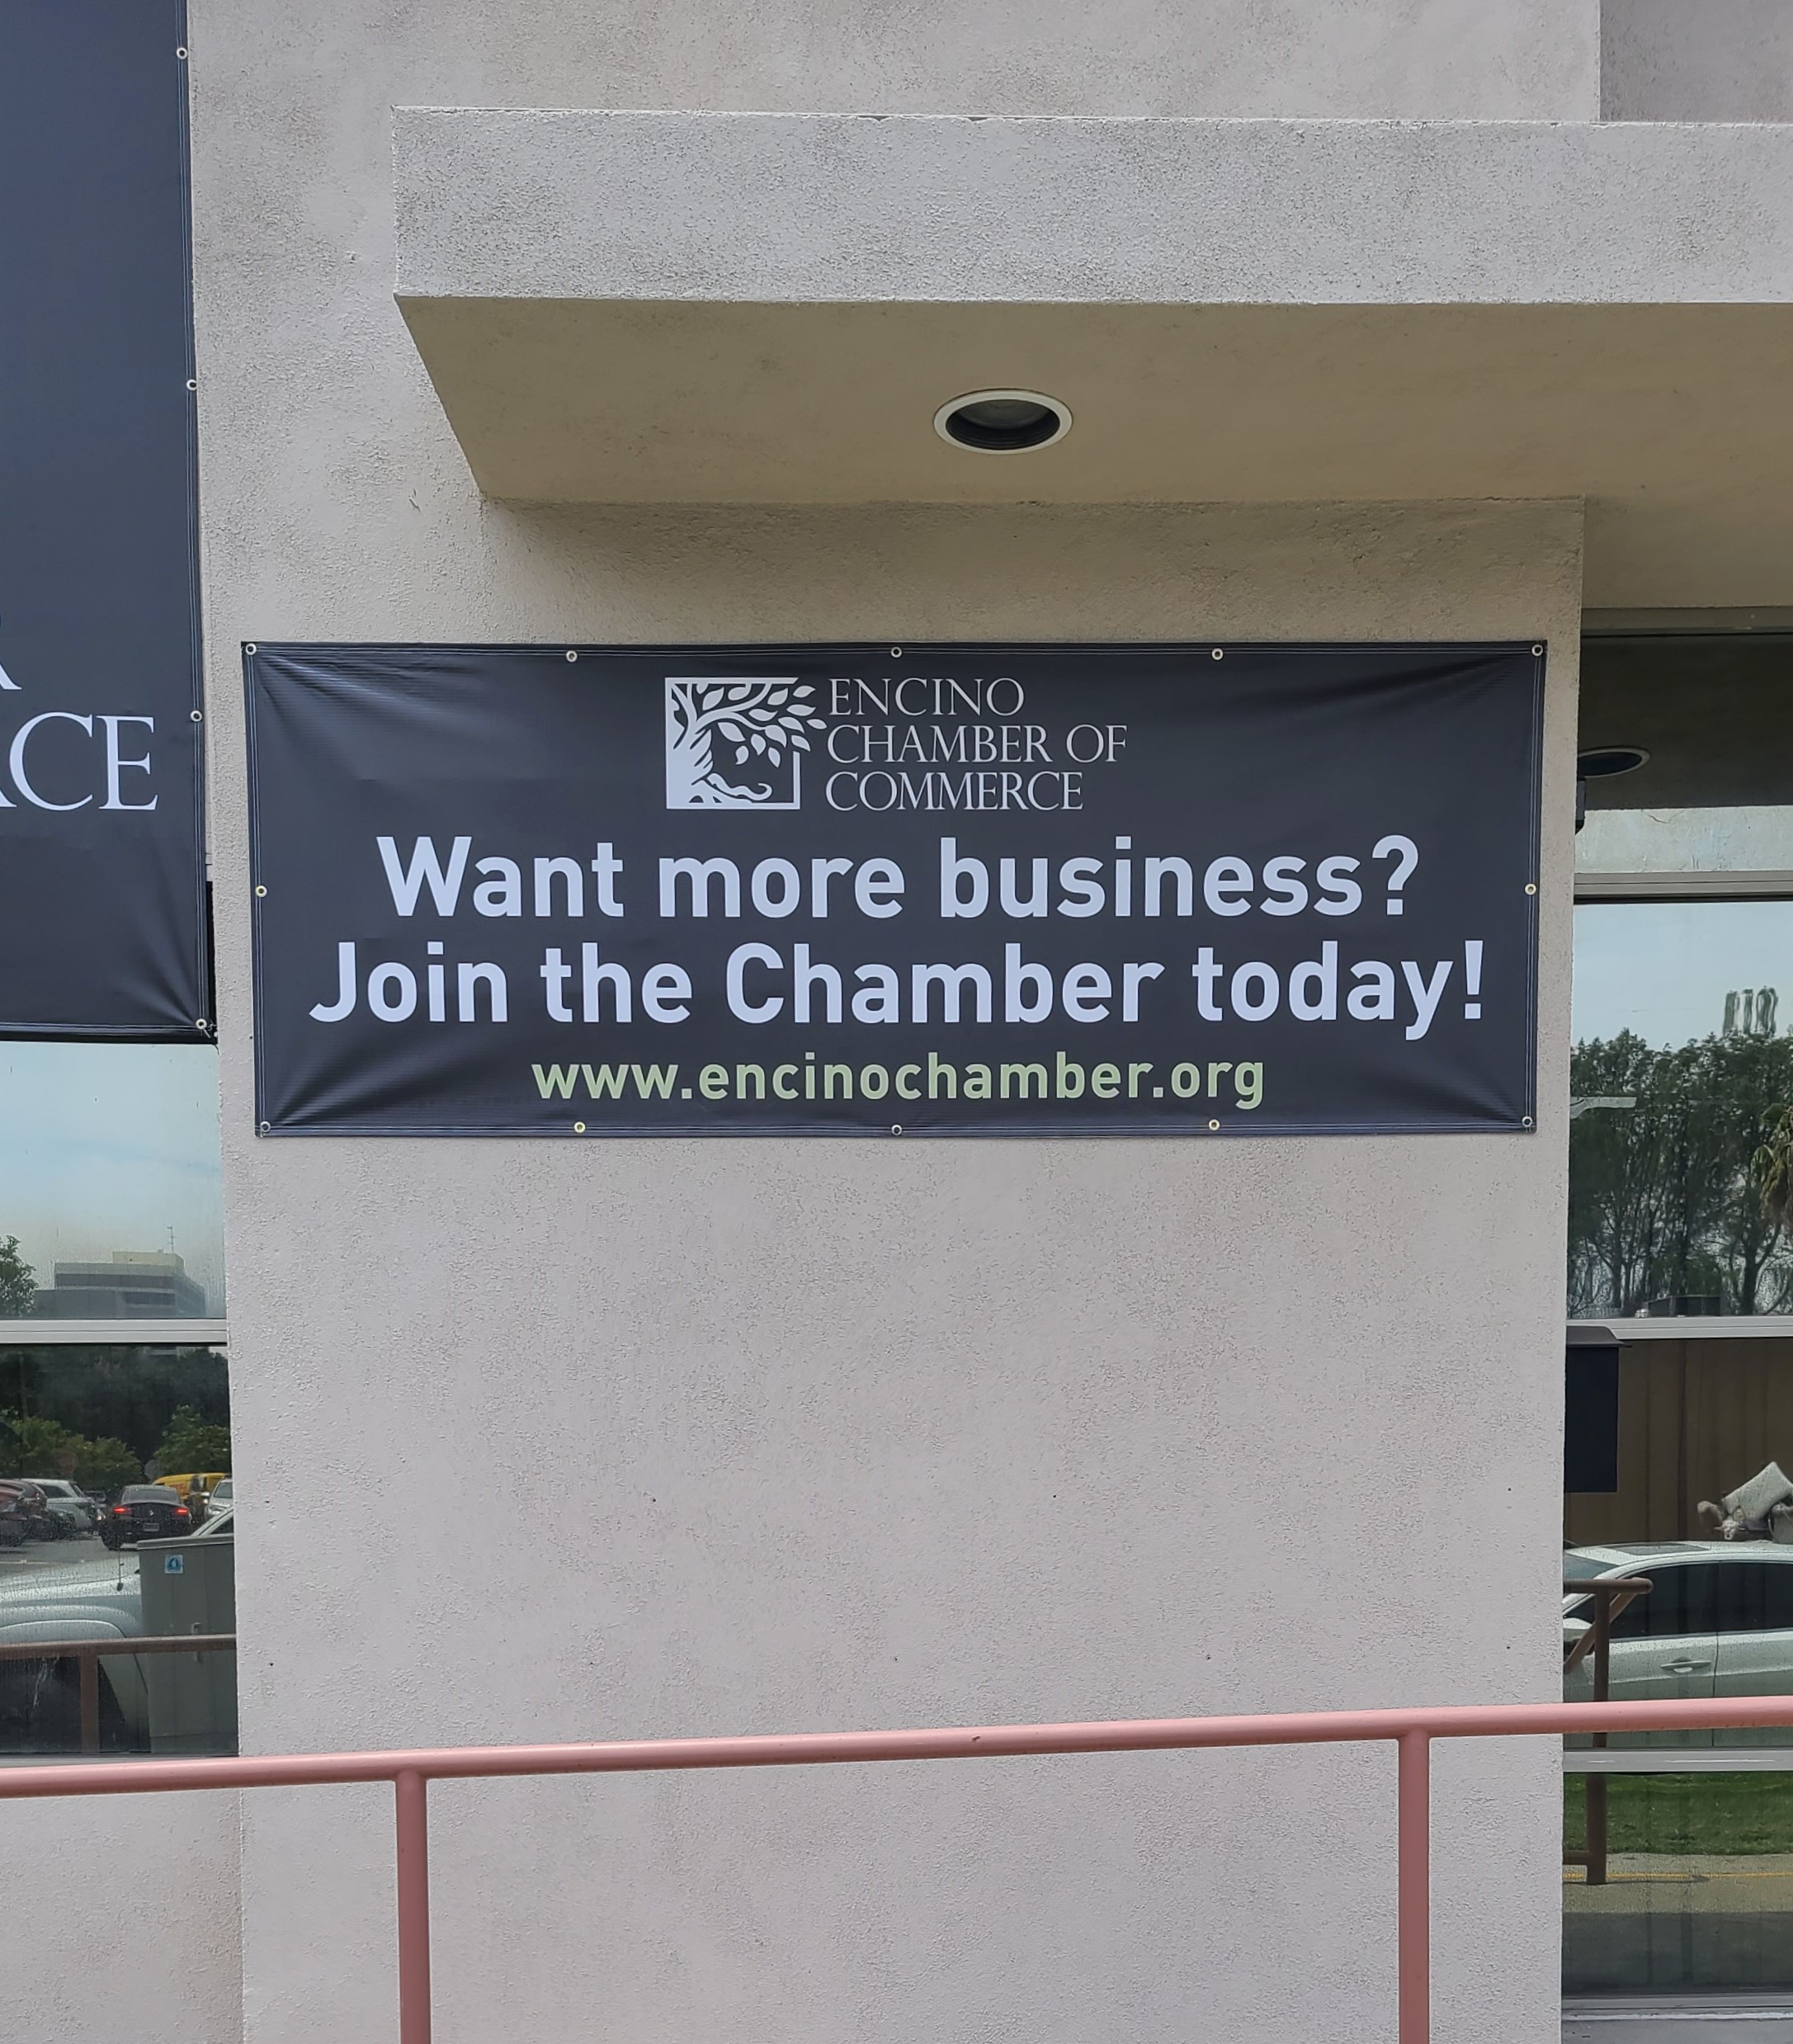 These are the advertisement banners we created for Encino Chamber of Commerce's campaign.